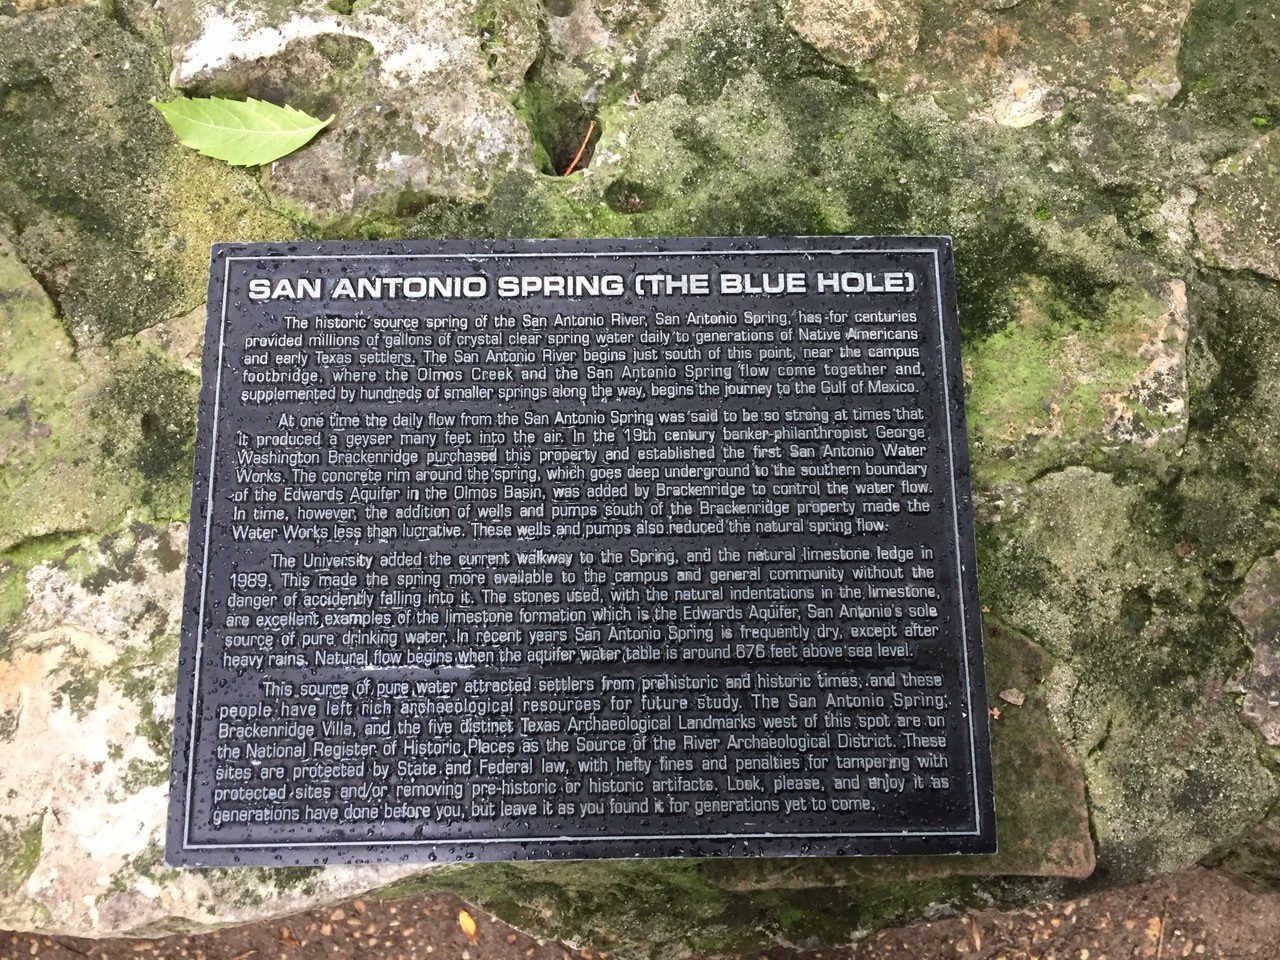 Sign tells story about the Blue Hole